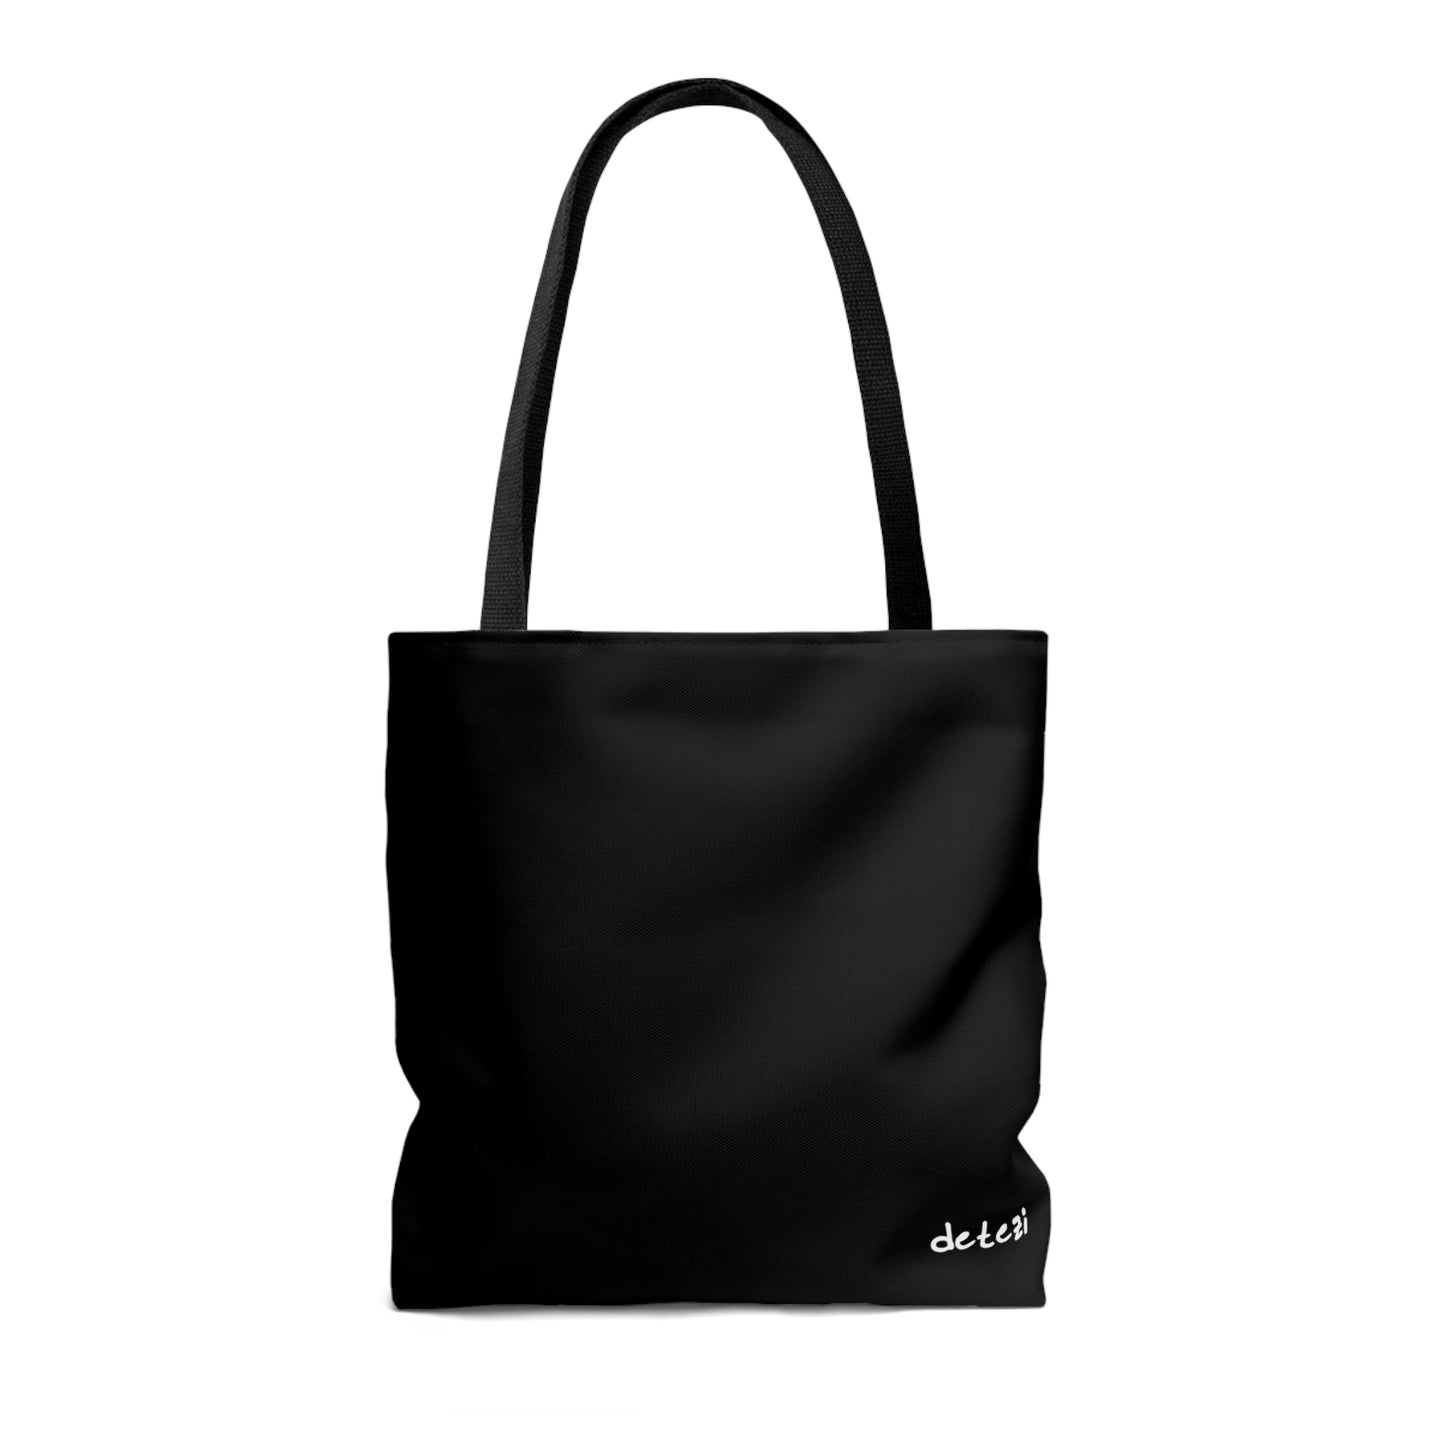 Adopt The Cropped | American Bully | Tote Bag